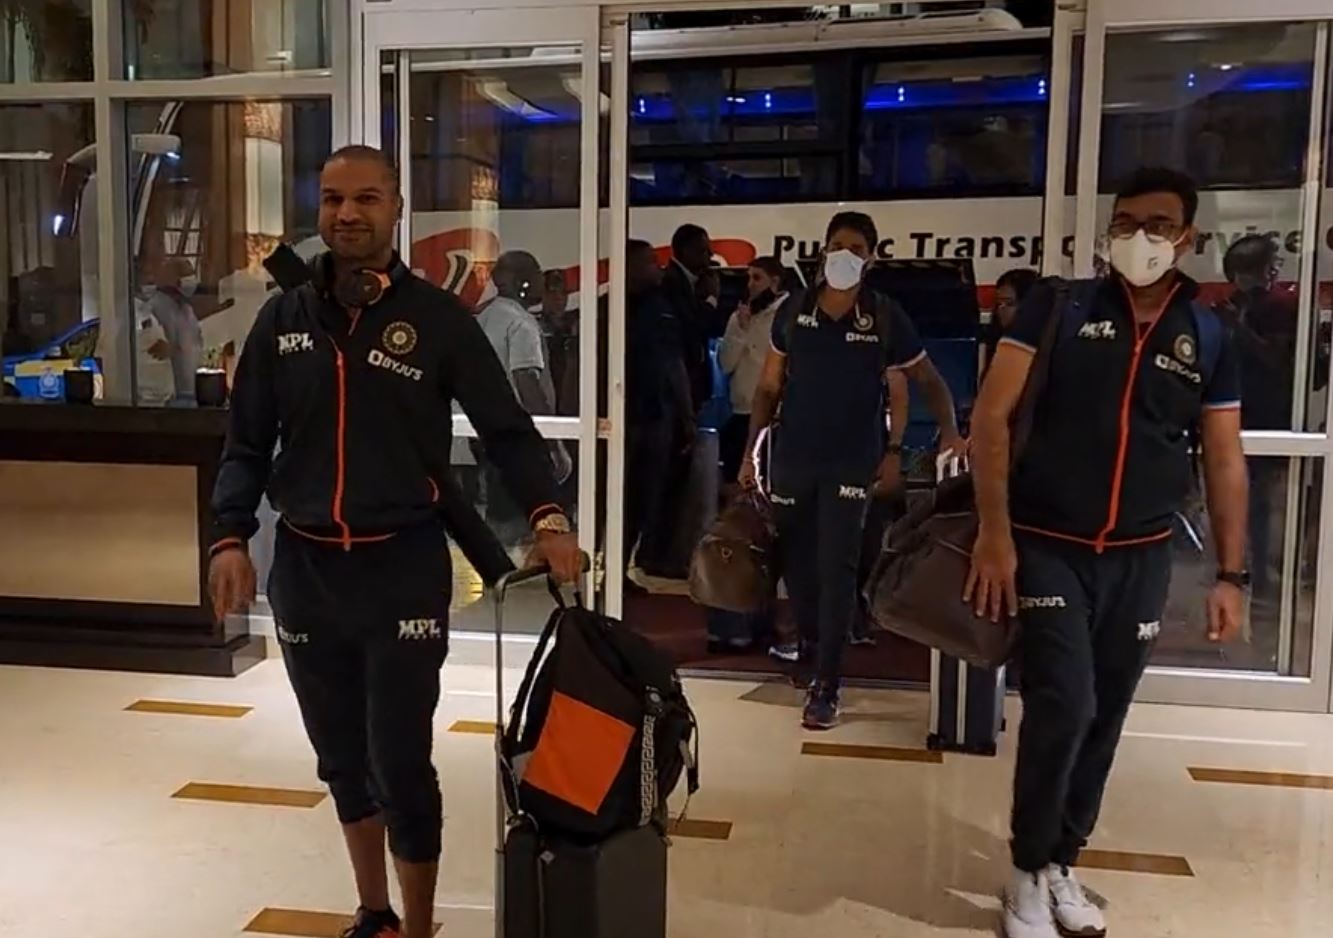 Shikhar Dhawan and Indian team arriving in Trinidad | BCCI